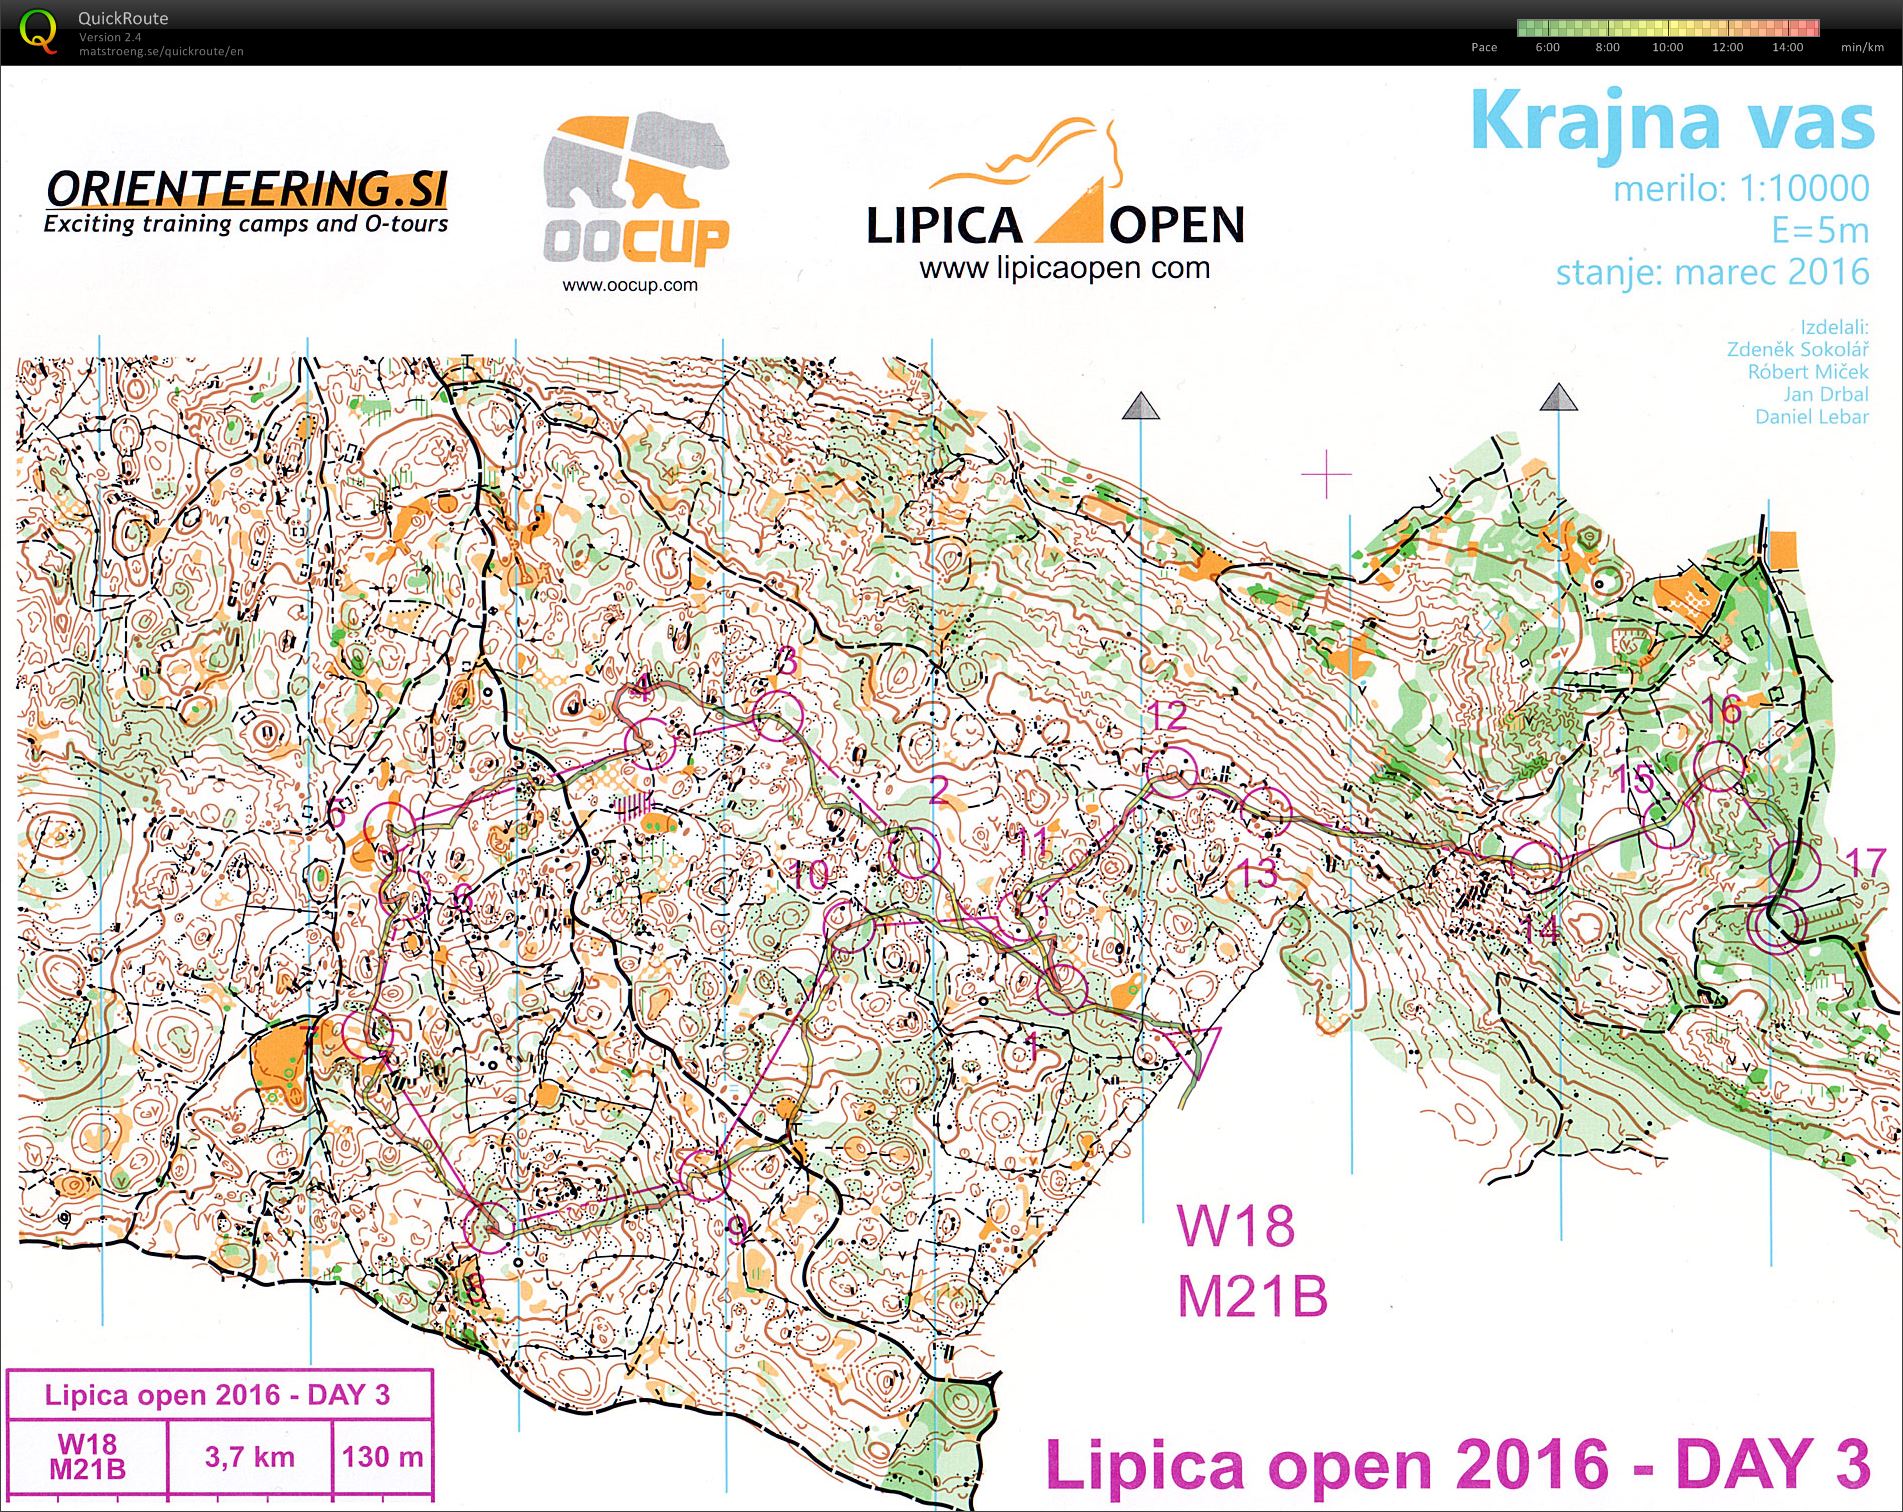 Lipica Open 2016 Day 3 (14.03.2016)